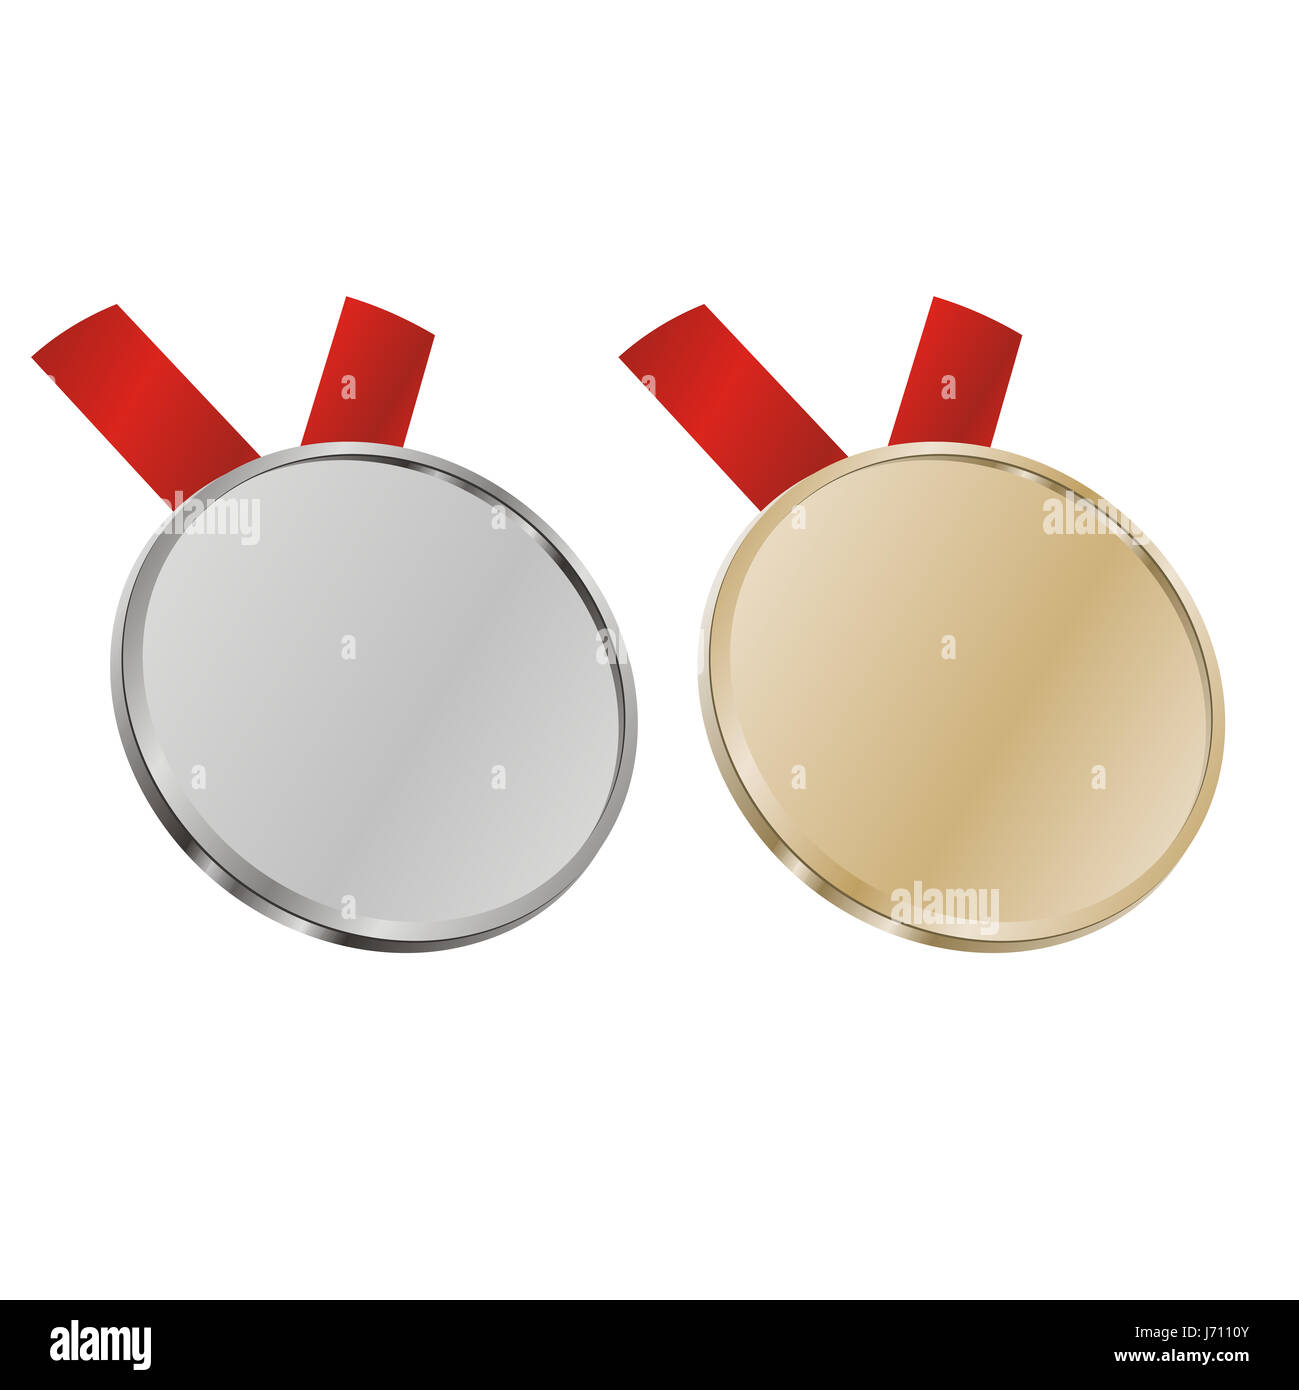 object isolated illustration prize vector medals object isolated round about Stock Photo